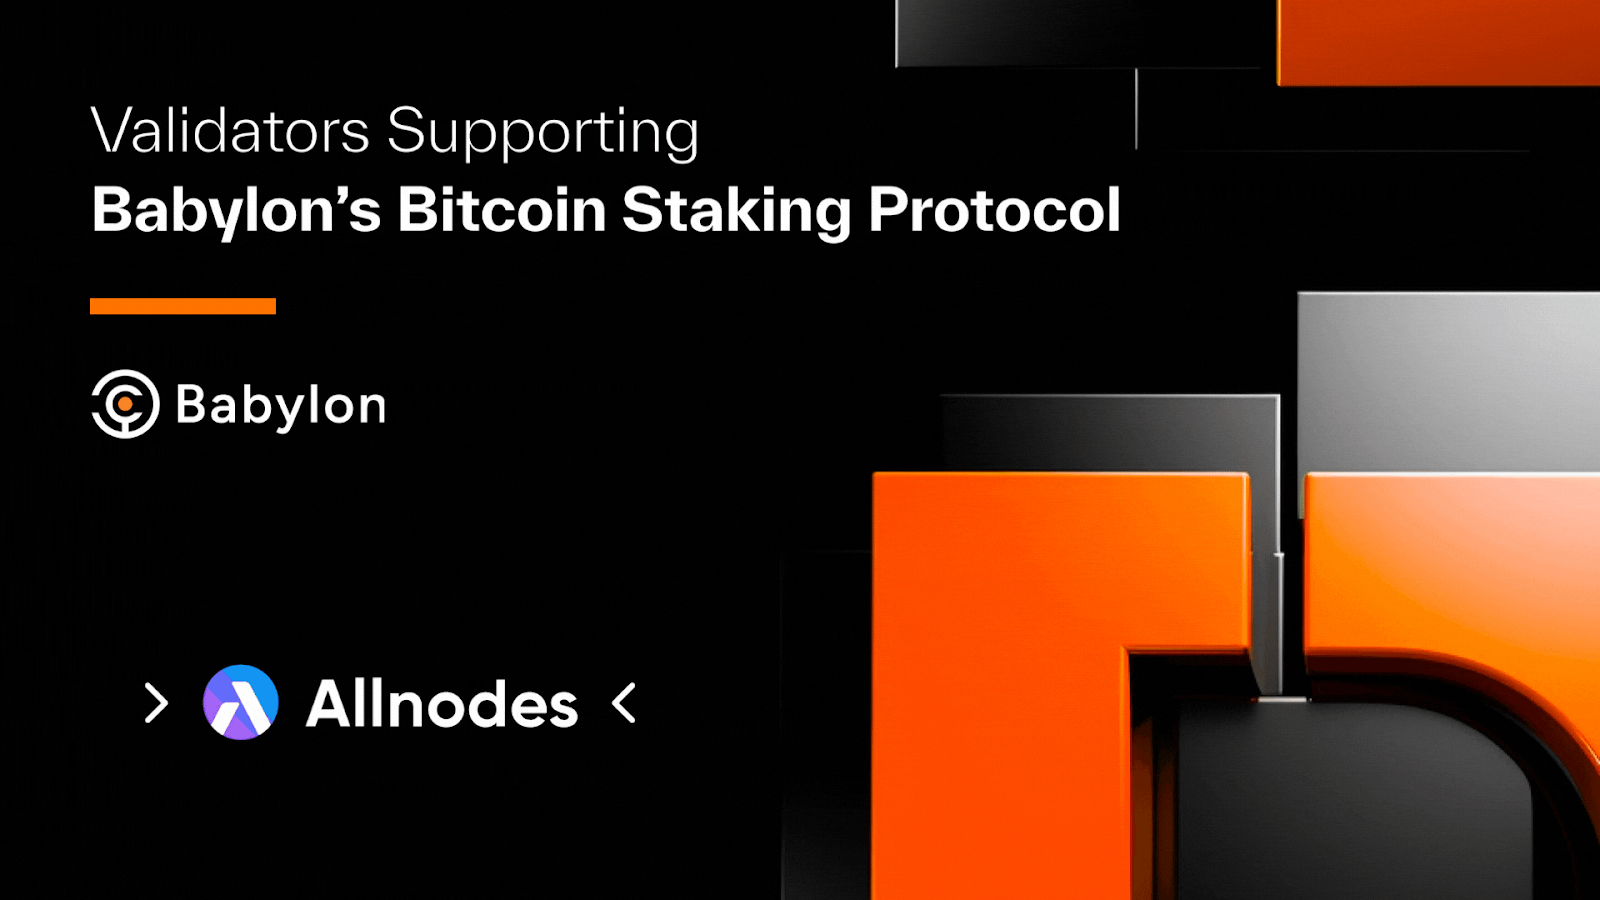 Babylon’s Bitcoin Staking Protocol is supported by a wide range of validators including Coinage X DAIC Capital, Galaxy, Figment, Allnodes, Stakecito, and others. (Image Credit: Babylon Twitter Post via Babylon Twitter)